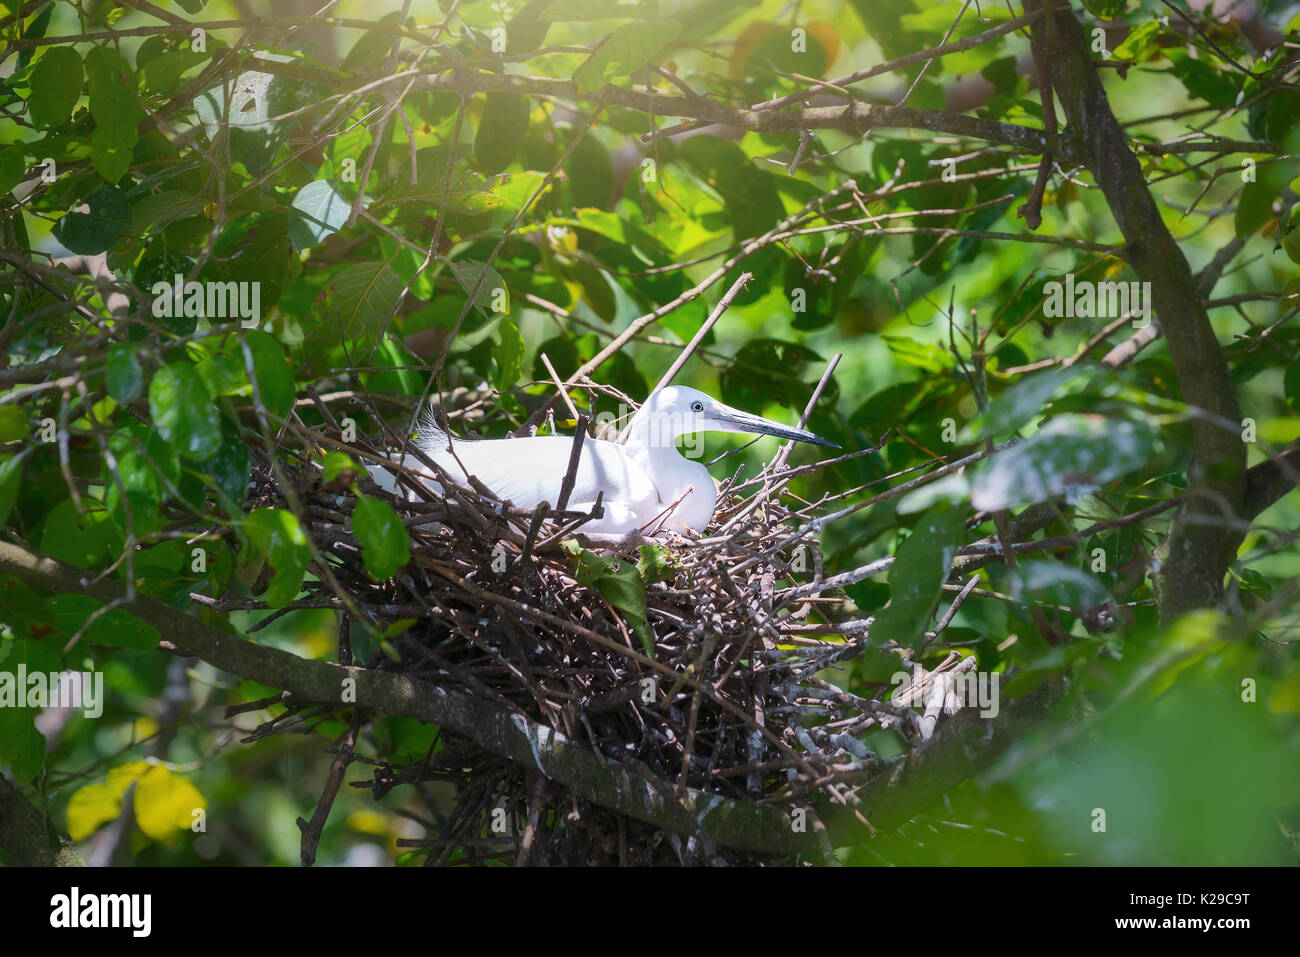 The white stork are building their nests with dry straws in the forest. They live in herds and need to be preserved in the natural world Stock Photo